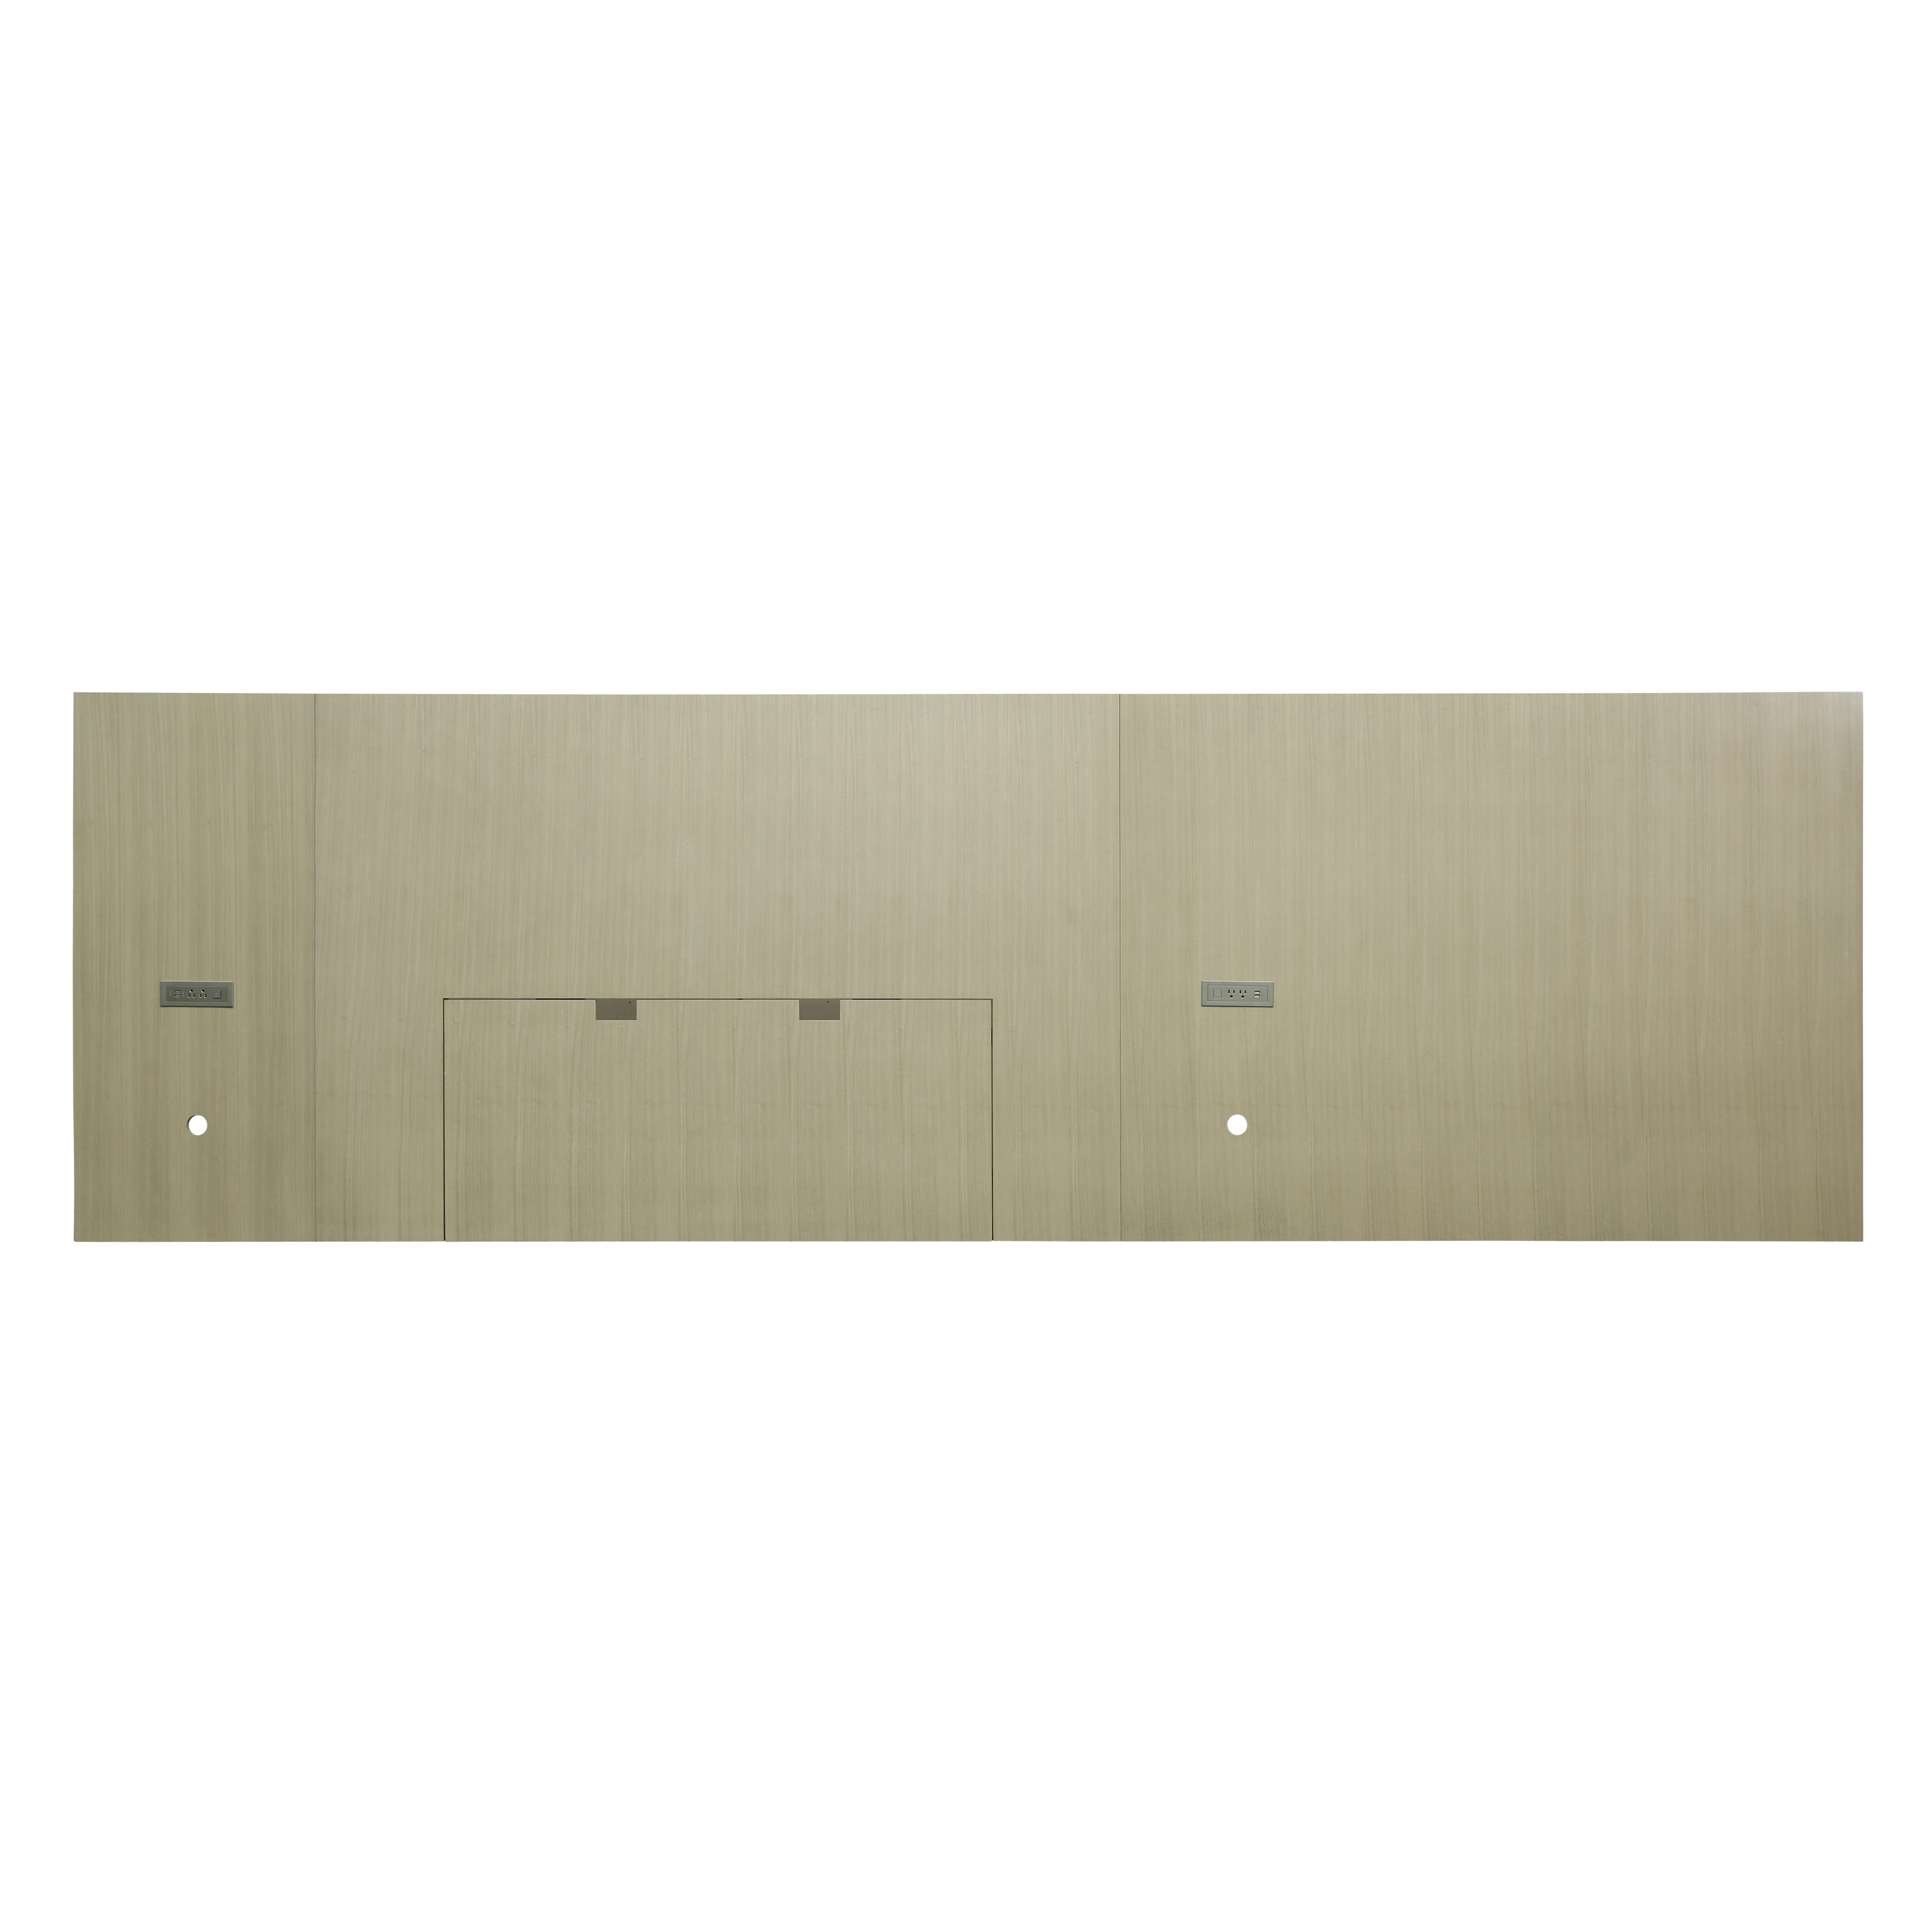 wall plate covers wholesale, wall panel supplier, bespoke wall panelling, wpc wall panel manufacturer, luxury wall panel design